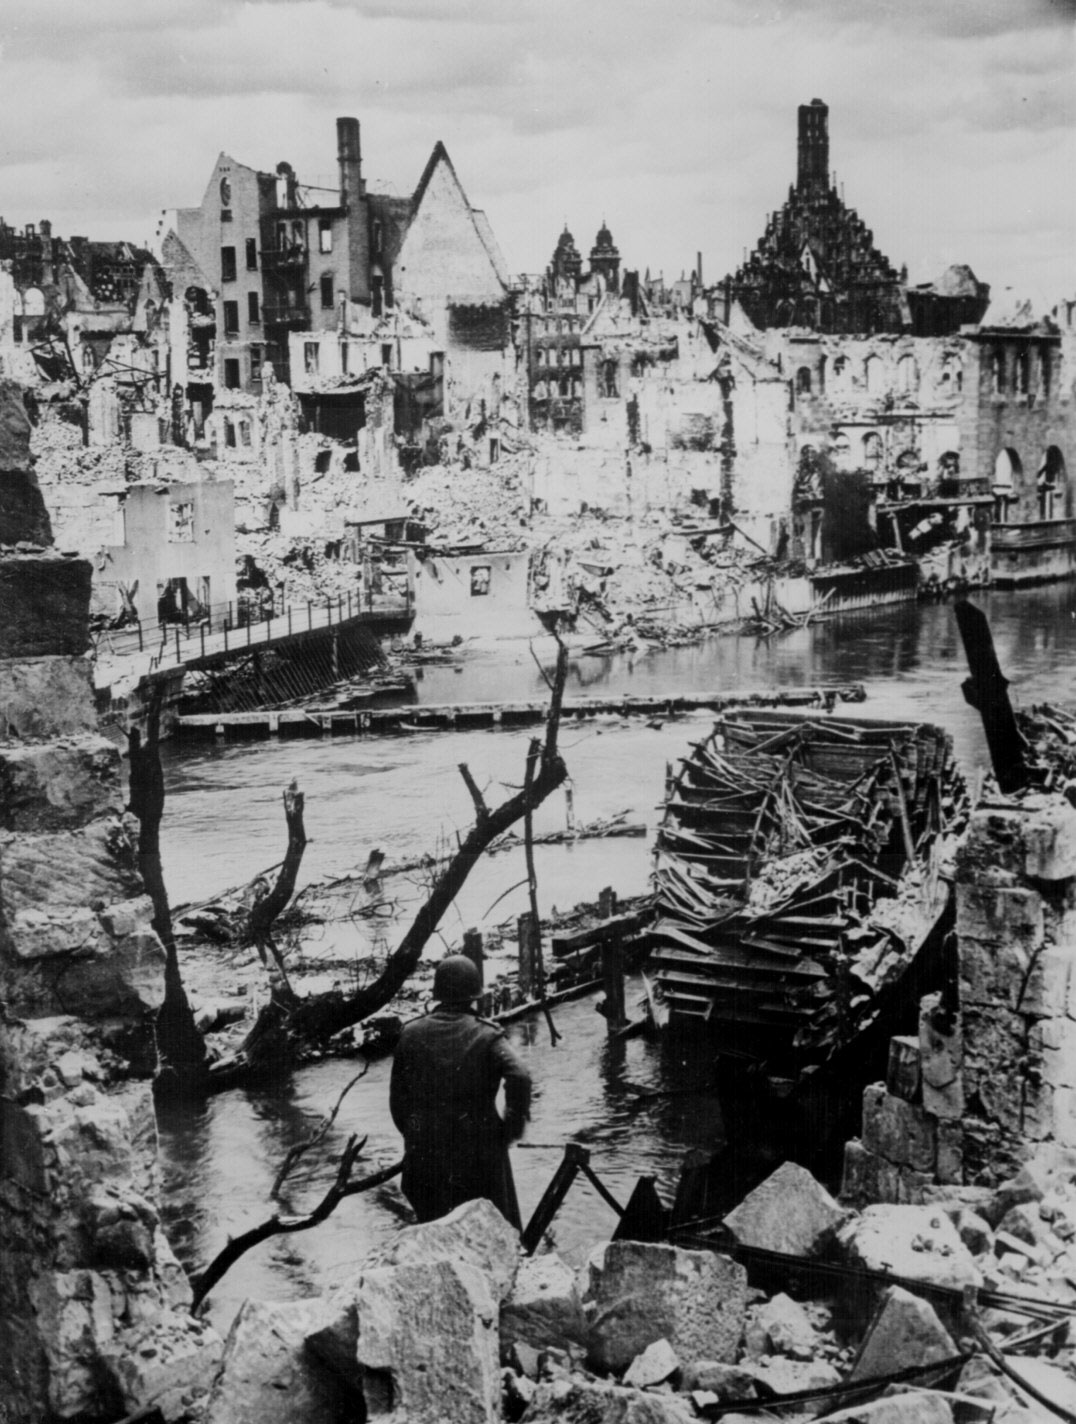 An American soldier observed the destruction of an industrial town near Nuremberg, Germany, 20 Apr 1945 (US National Archives: 208-AA-207L-1)